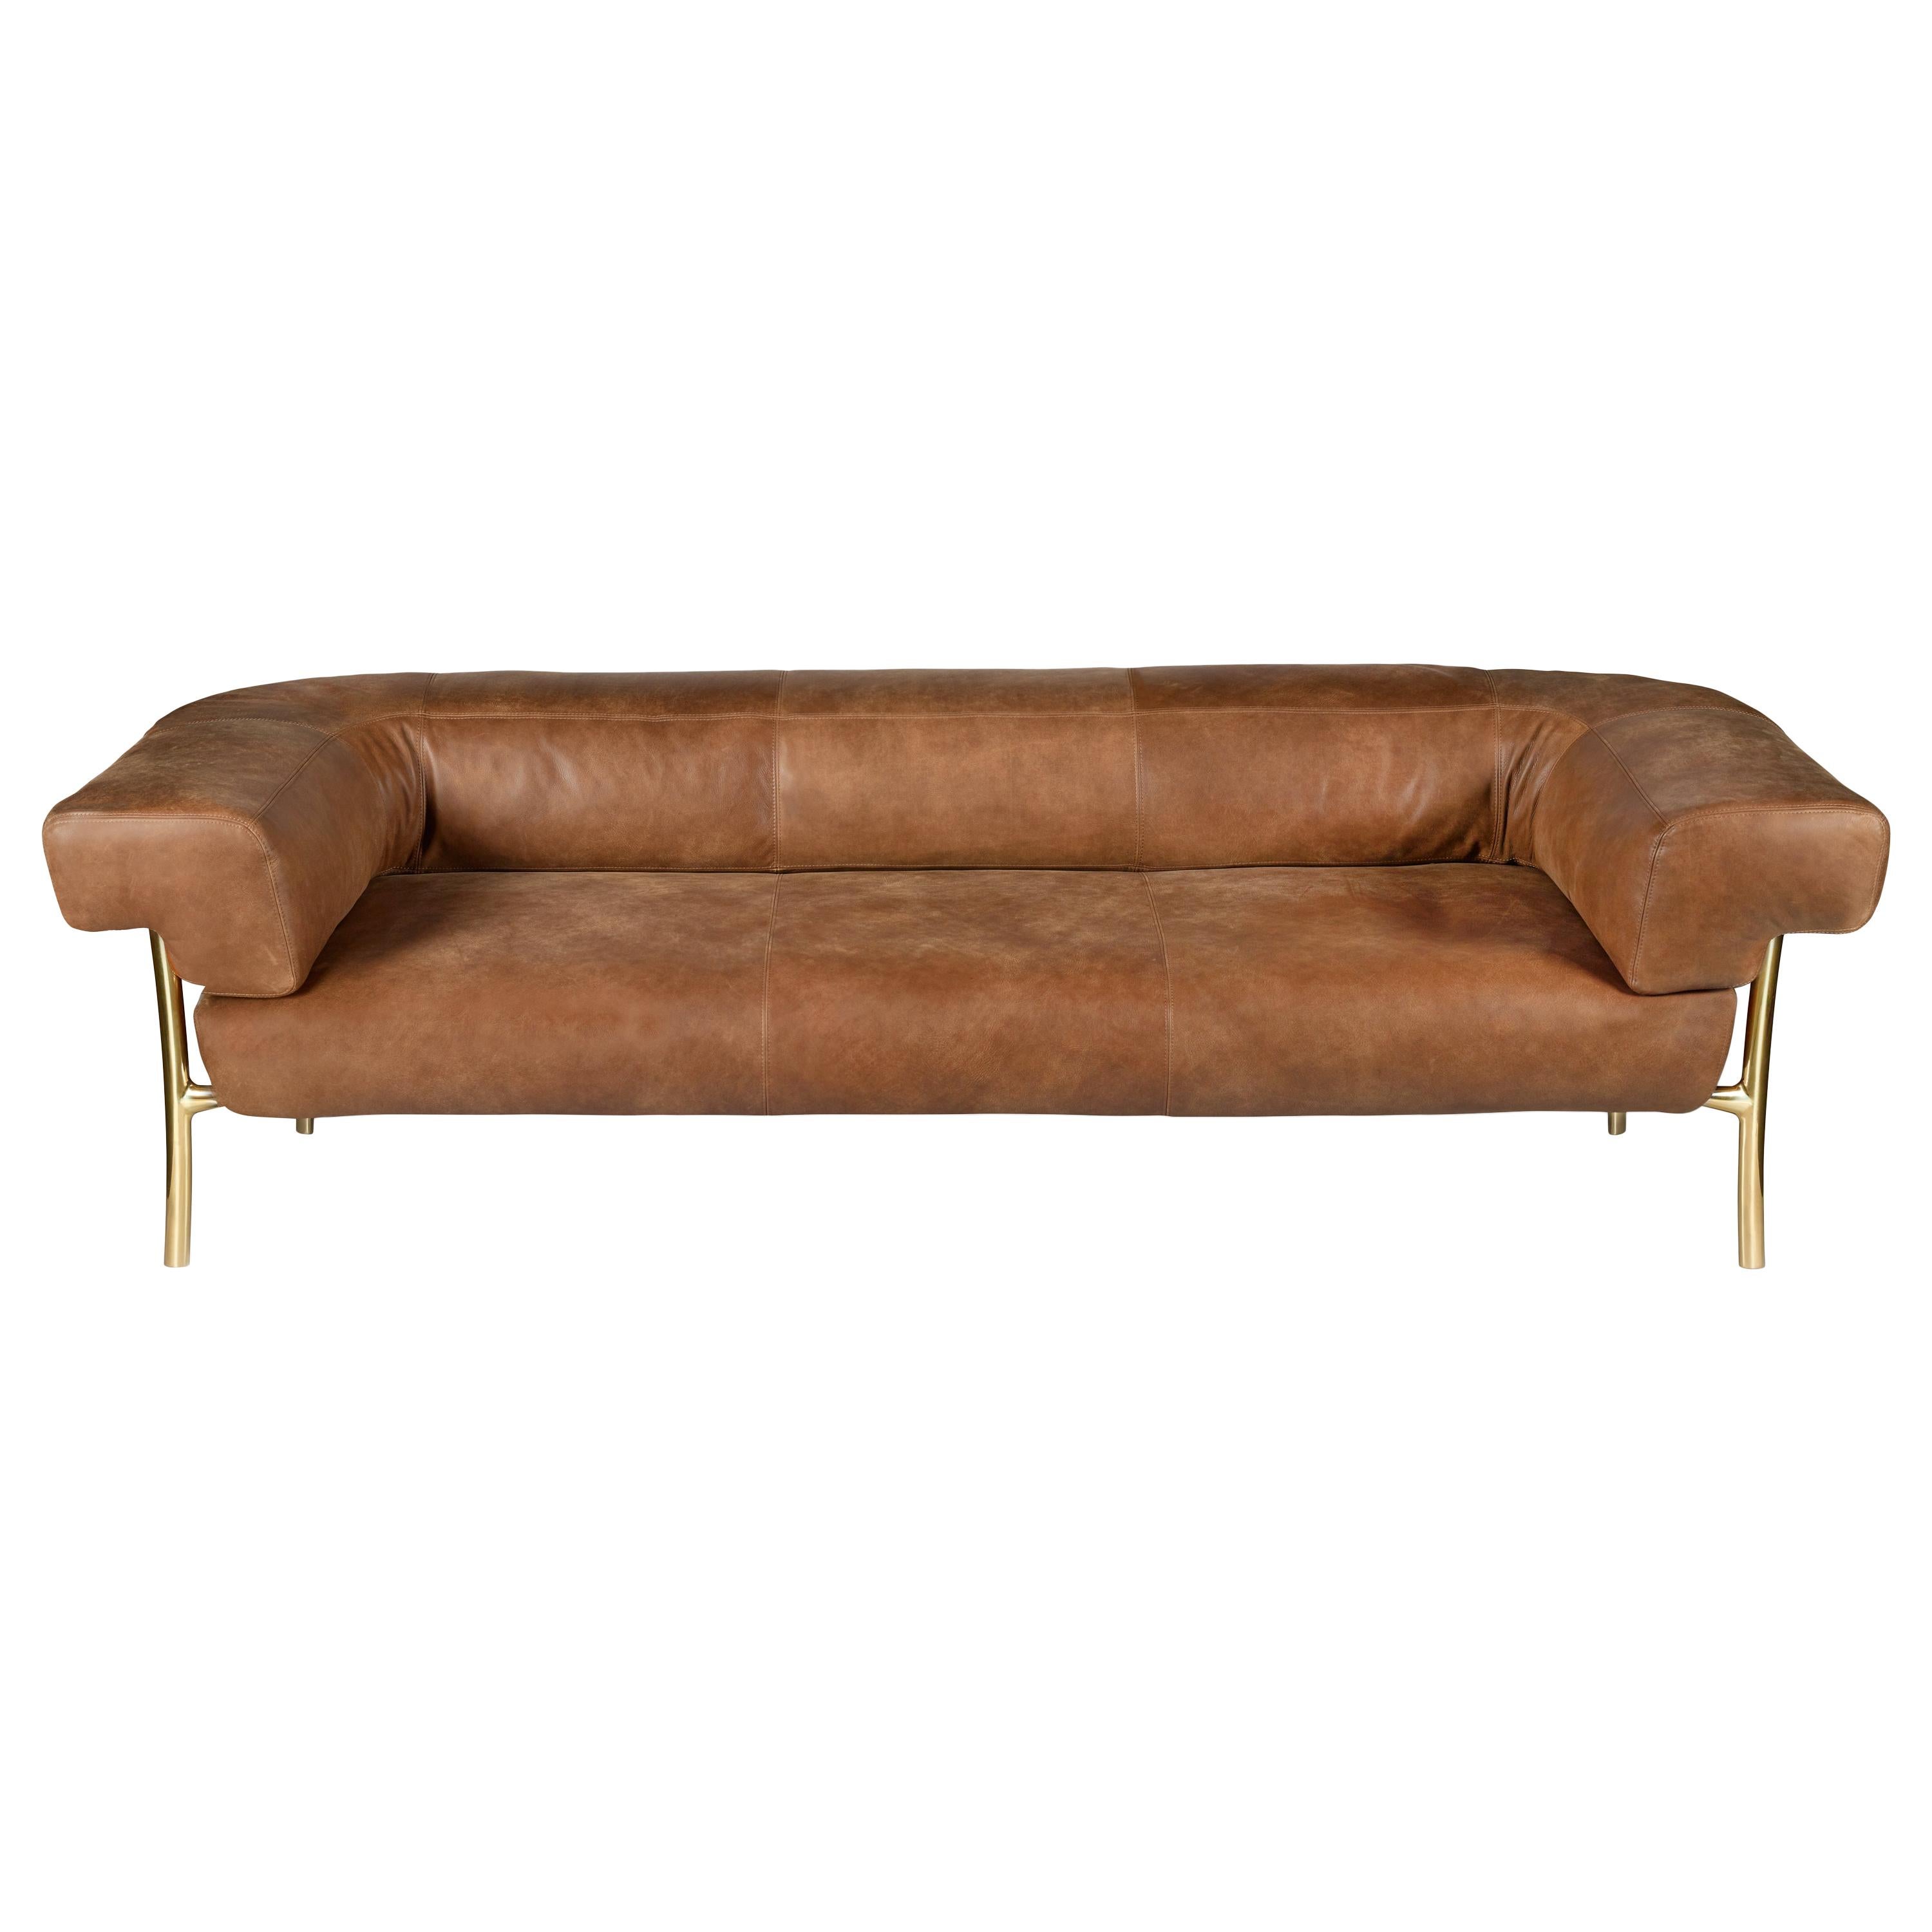 Katana 2 Seater Sofa in Choclate Forest Leather with Polished Brass Legs For Sale